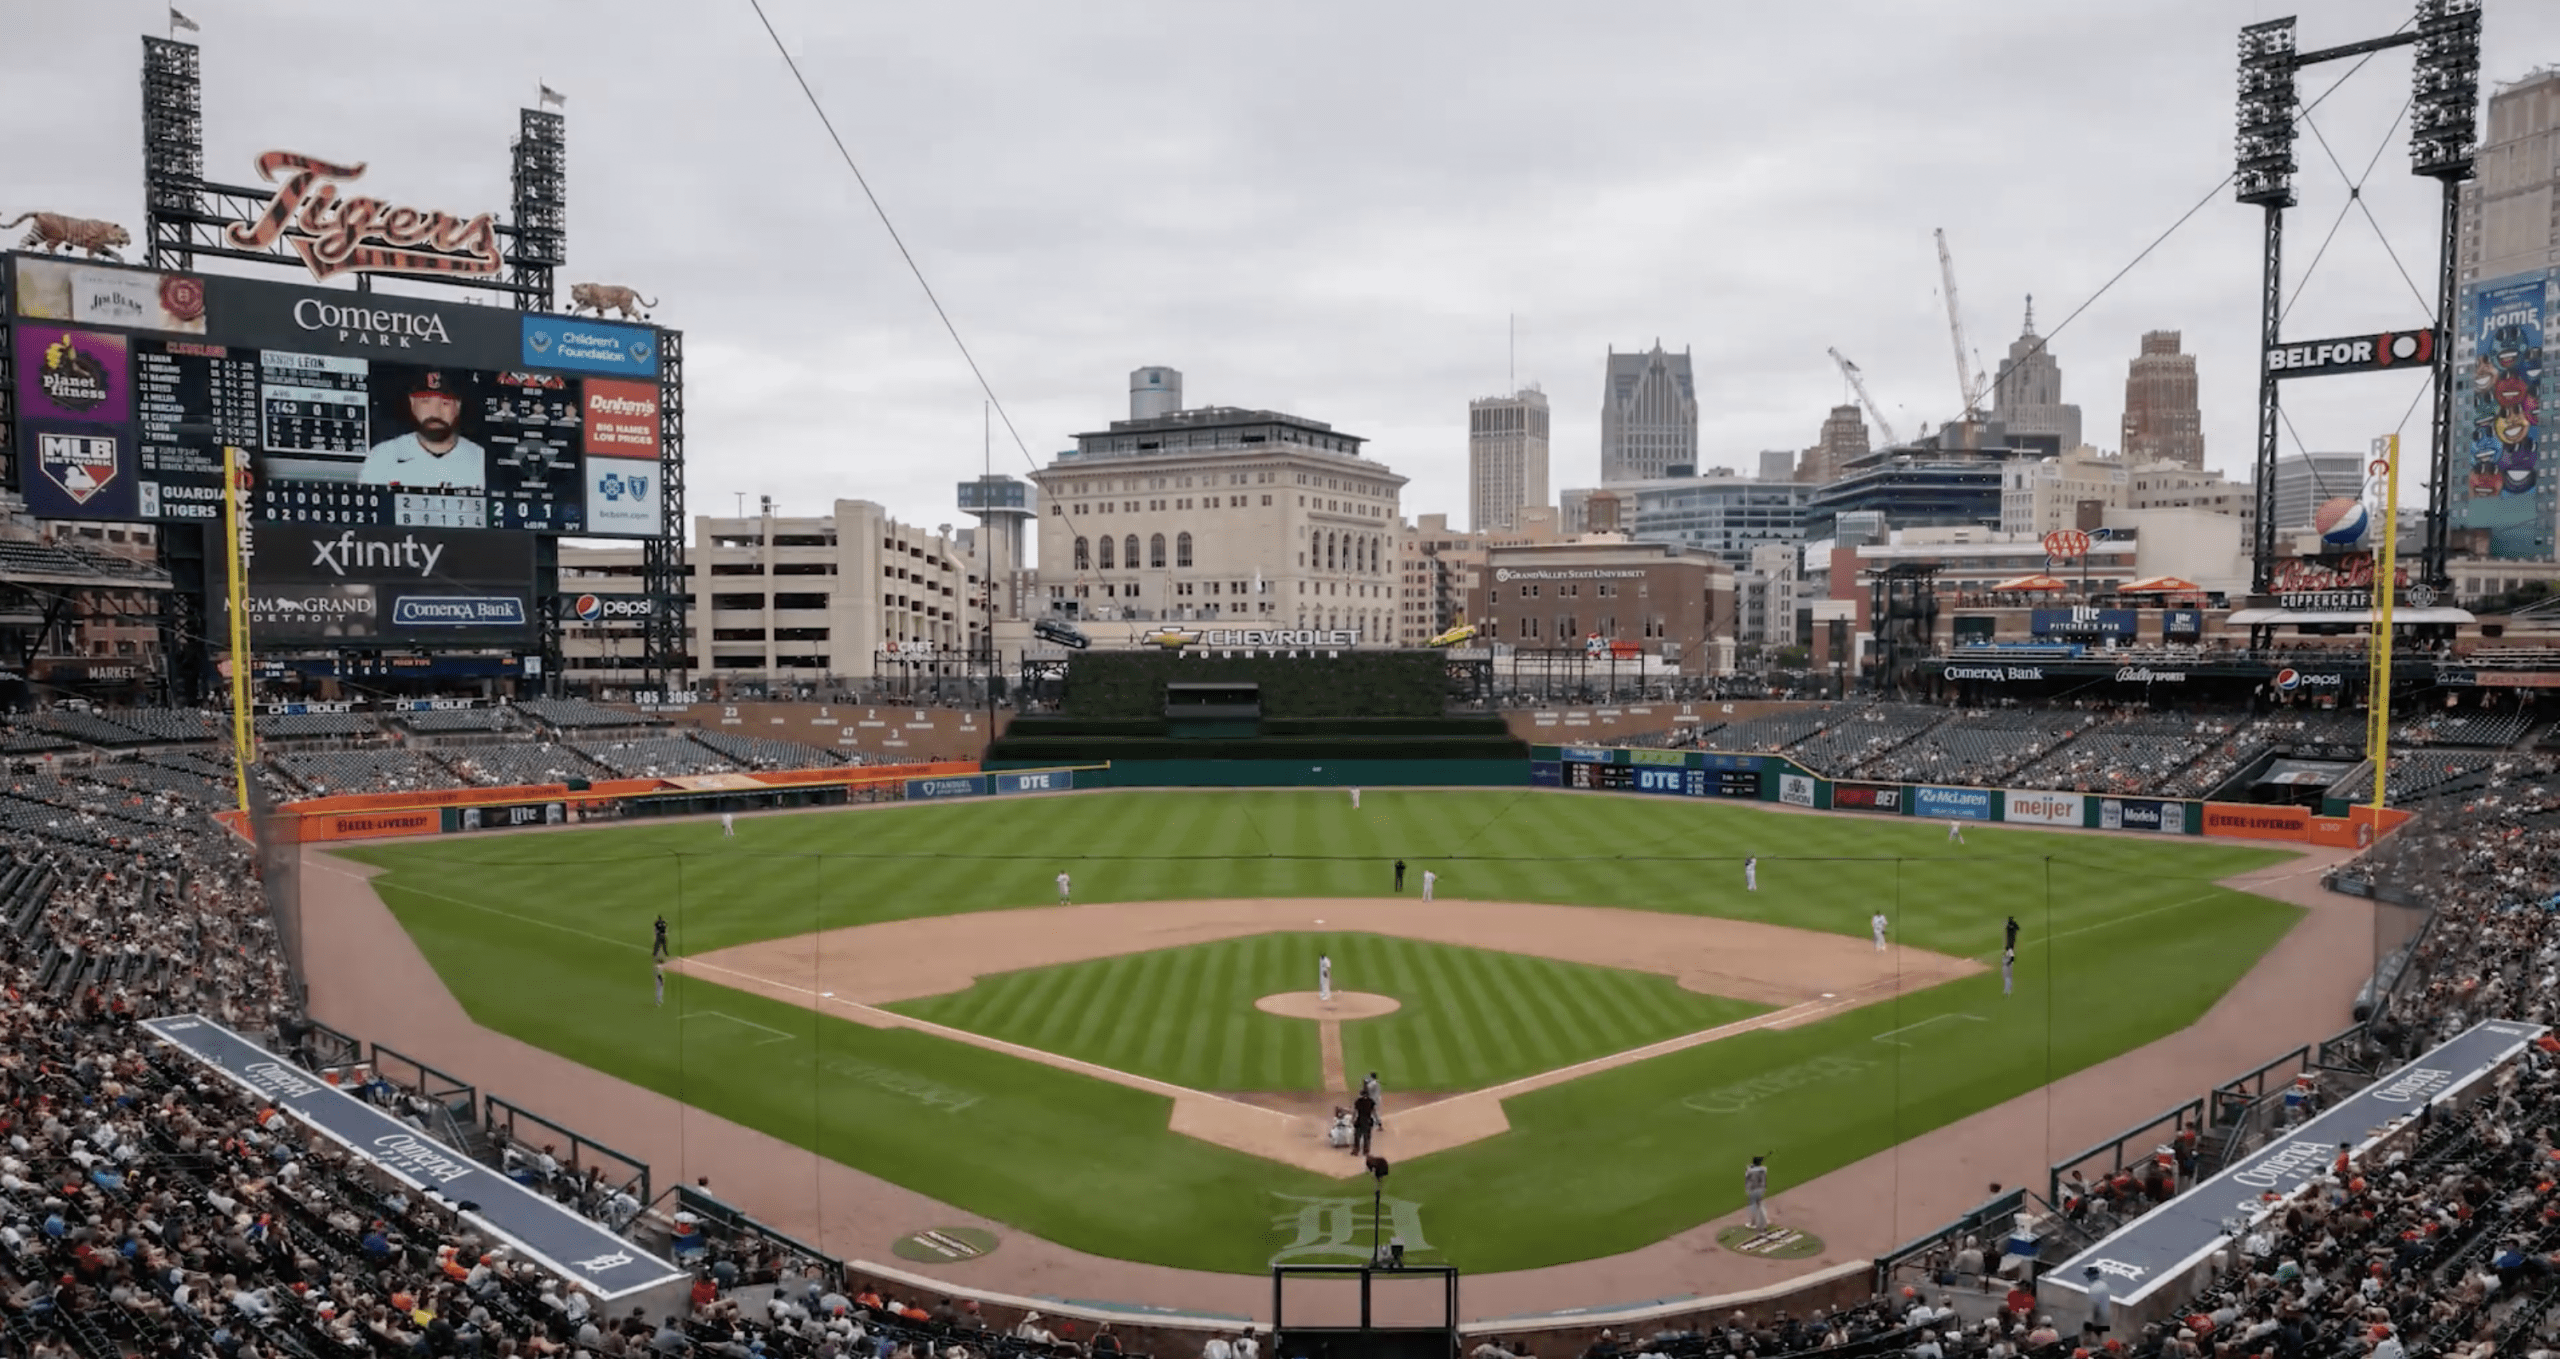 Opening day at Comerica Park 2022